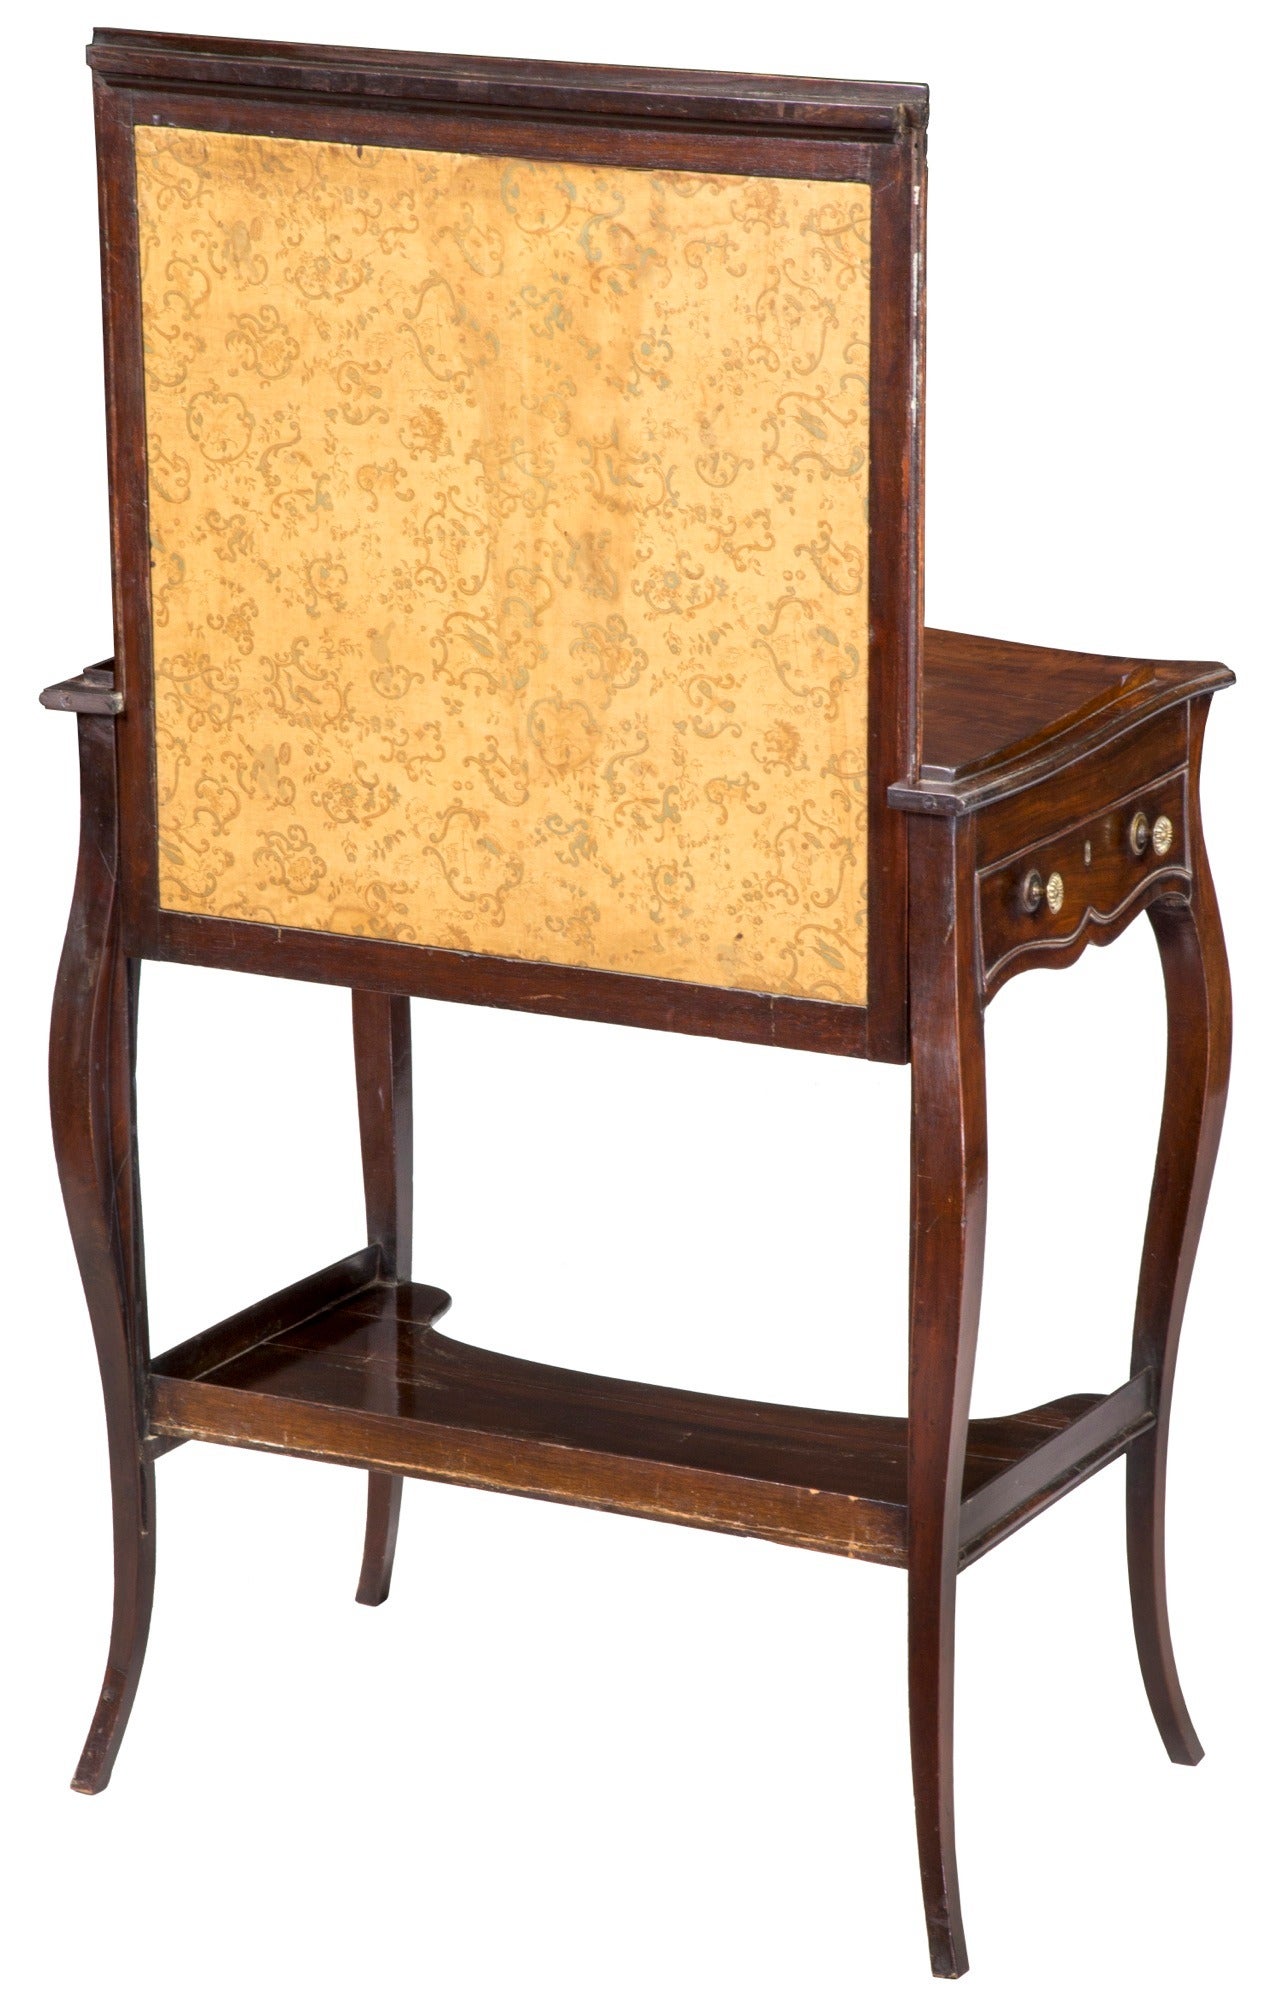 George III Mahogany Ladies' Writing Desk, circa 1760-1770 In Excellent Condition For Sale In Providence, RI